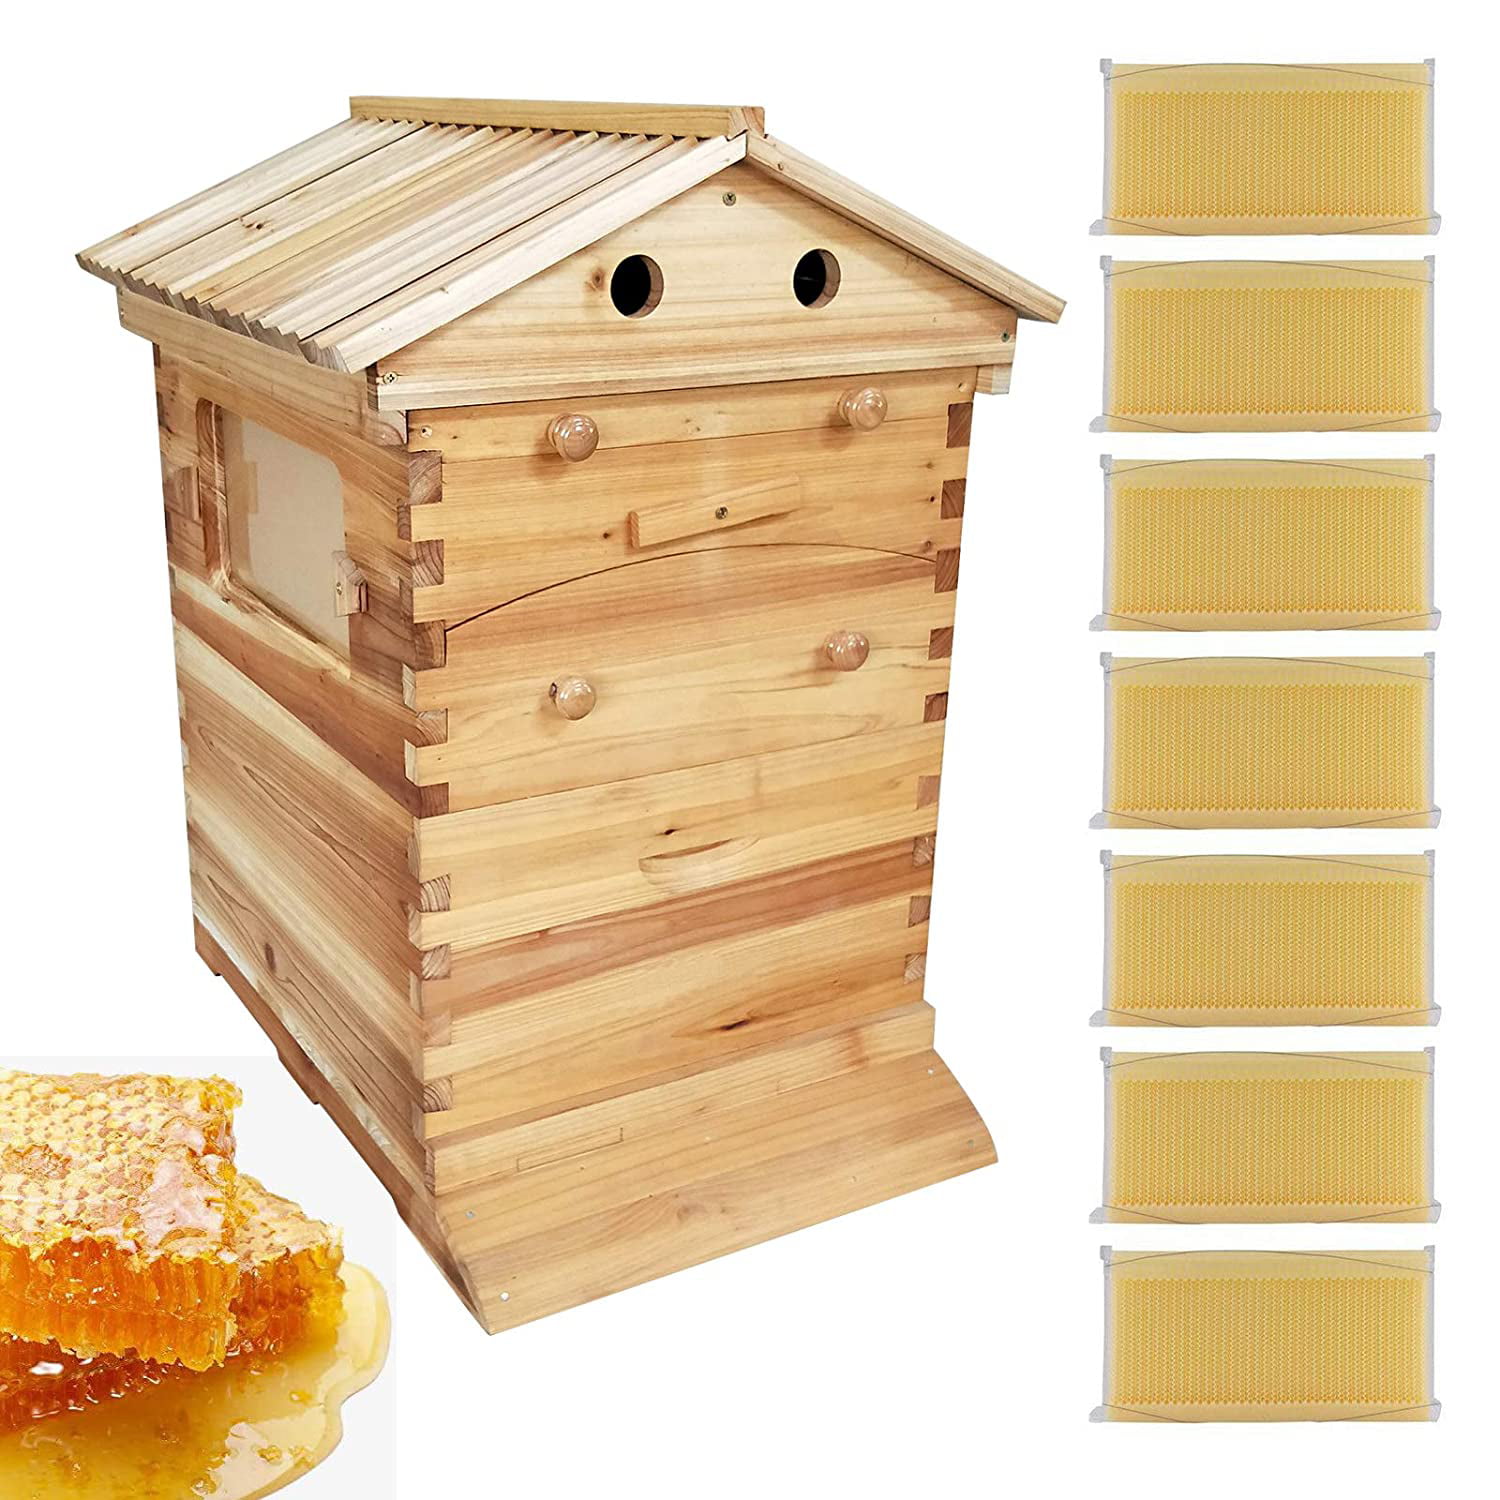 Details about   WOODEN BEEKEEPING BEEHIVE HOUSE W/ 7PCS UPGRADED AUTO BEE COMB HIVE FRAMES 